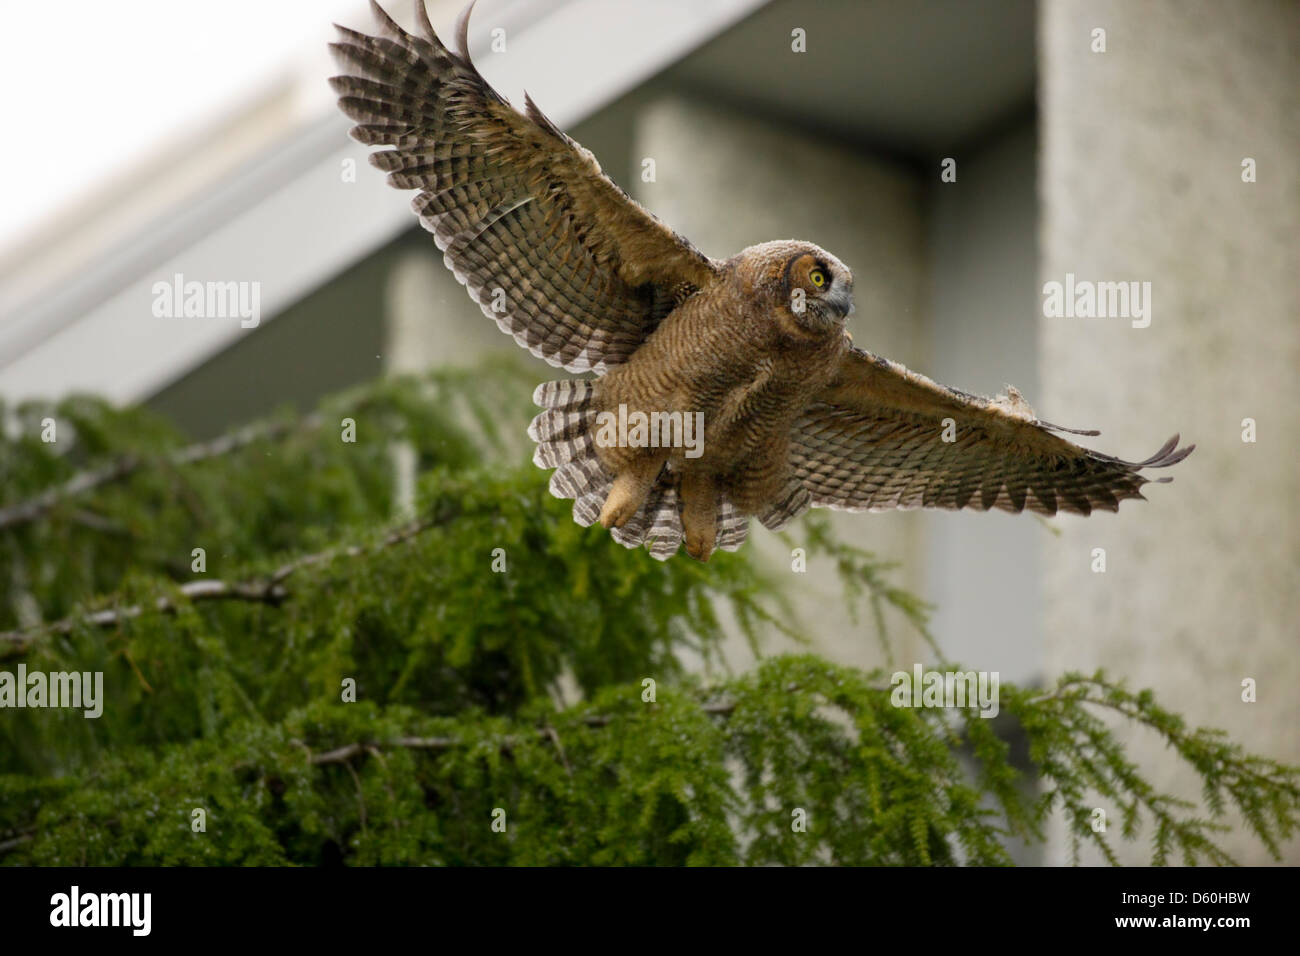 Great horned owl fledgling taking flight from fir tree towards planter box nest in building. Stock Photo